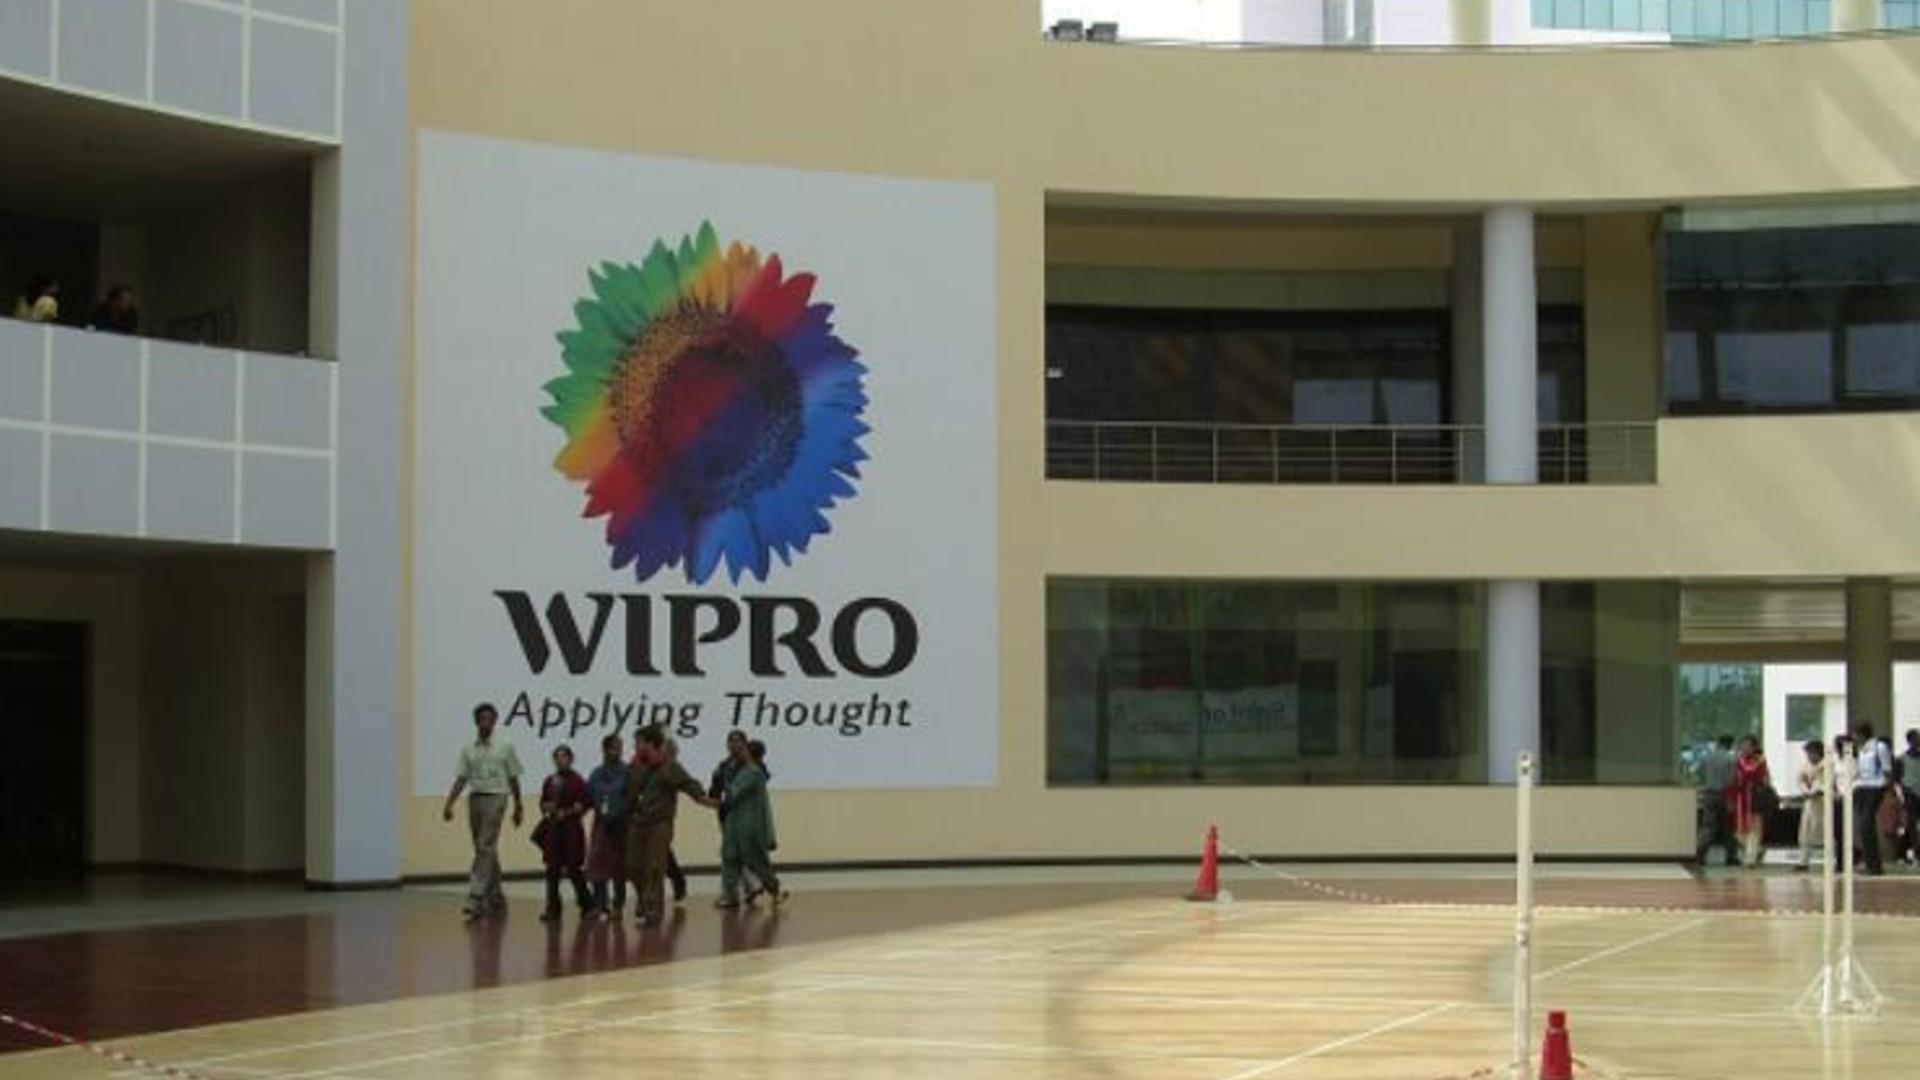 Wipro CEO Thierry Delaporte earned an annual pay of Rs 37.9 crore in the Financial Year 2020.  The annual pay does not include stock compensation and other perks.  Wipro CEO is #1 Earner Followed By Infosys And TCS This makes him the highest paid CEO in comparison with other Indian tech giants Infosys and TCS.   Former Wipro CEO Abidali Neemuchwala raked in Rs 34 crore during the same period.   In comparison, Infosys chief Salil Parekh came in second highest as he earned Rs 34.67 crore after Delaporte.  TCS CEO and MD Rajesh Gopinathan earned 53% more in FY 2021 with his salary amounting to Rs 20.36 crore.  This amount can be broken up into Rs 1.27 crore of salary + Rs 2.09 crore of benefits, perquisites and allowances + Rs 17 crore constituting the bulk in commission.   In comparison, his figures for the previous financial year 2019-20 was Rs 13.3 crore.  TCS COO N Ganapathy Subramaniam made Rs 16.1 crore in the last financial year, comprising Rs 1.21 crore in salary, Rs 1.88 crore in benefits, perquisites and allowances, and Rs 13 crore in commission.  TCS Report Explains Remuneration Increase Compared To 2020 The annual report of TCS for FY21, where the TCS remuneration figures are sourced from, stated that the 53% increase is not comparable to 2020, the year the pandemic broke out.   After the coronavirus contagion became a worlwide crisis and the ensuing economic impact, the Directors decided to take a cut of 15% to their executive remuneration considering the need for the firm to conserve resources and also to express solidarity with the lower colleagues.  TCS Rides Growth Wave TCS Chairman N Chandrasekaran said that there are immense growth opportunities for his firm as they ride the wave of new technologies that the pandemic kicked off.   He reaffirmed that TCS is the best choice of “transformation partner” for customers given its focus on solutions and belief in its “differentiated capabilities and collaborative approach”.  For TCS employees, a workforce standing at 4,48,649 as of FY-end 2020-21, the mean increase in annual pay was 5.2% in the last FY.